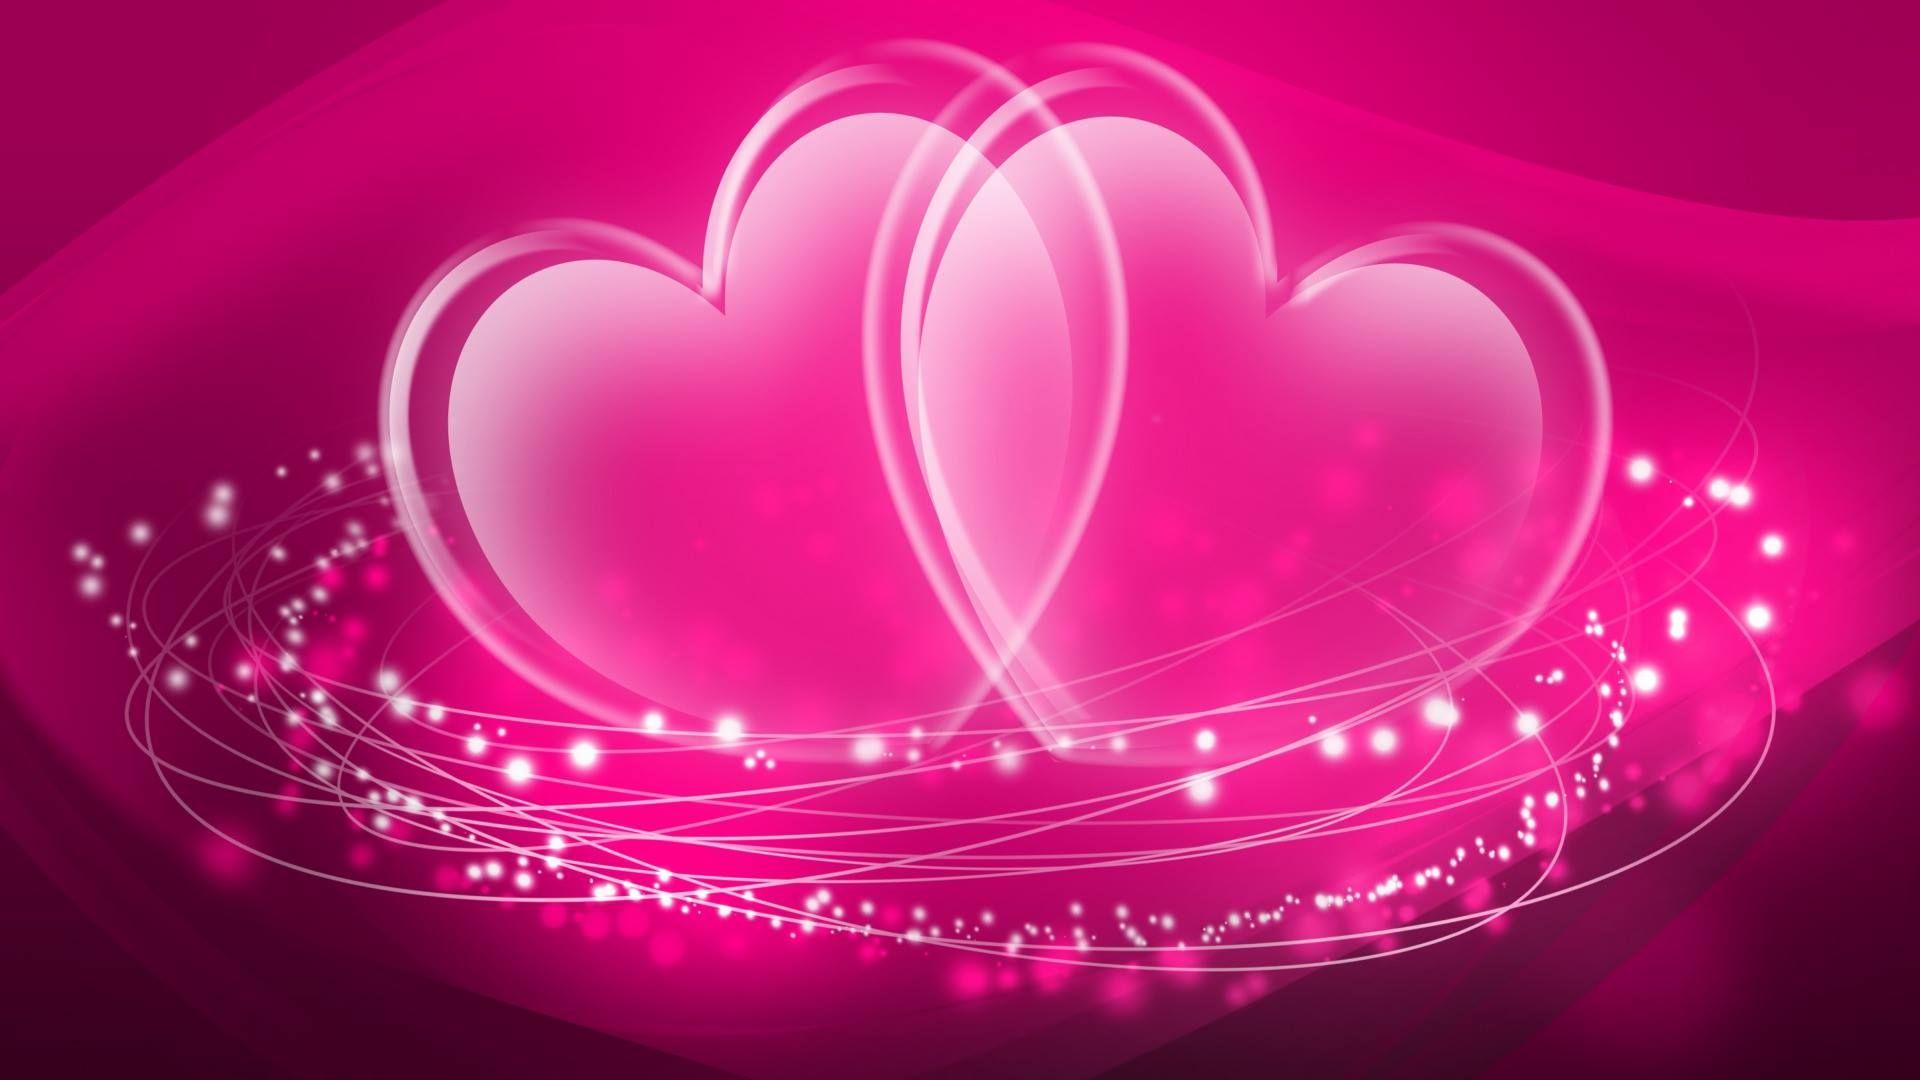 Pink Hearts. Pink heart background, Heart